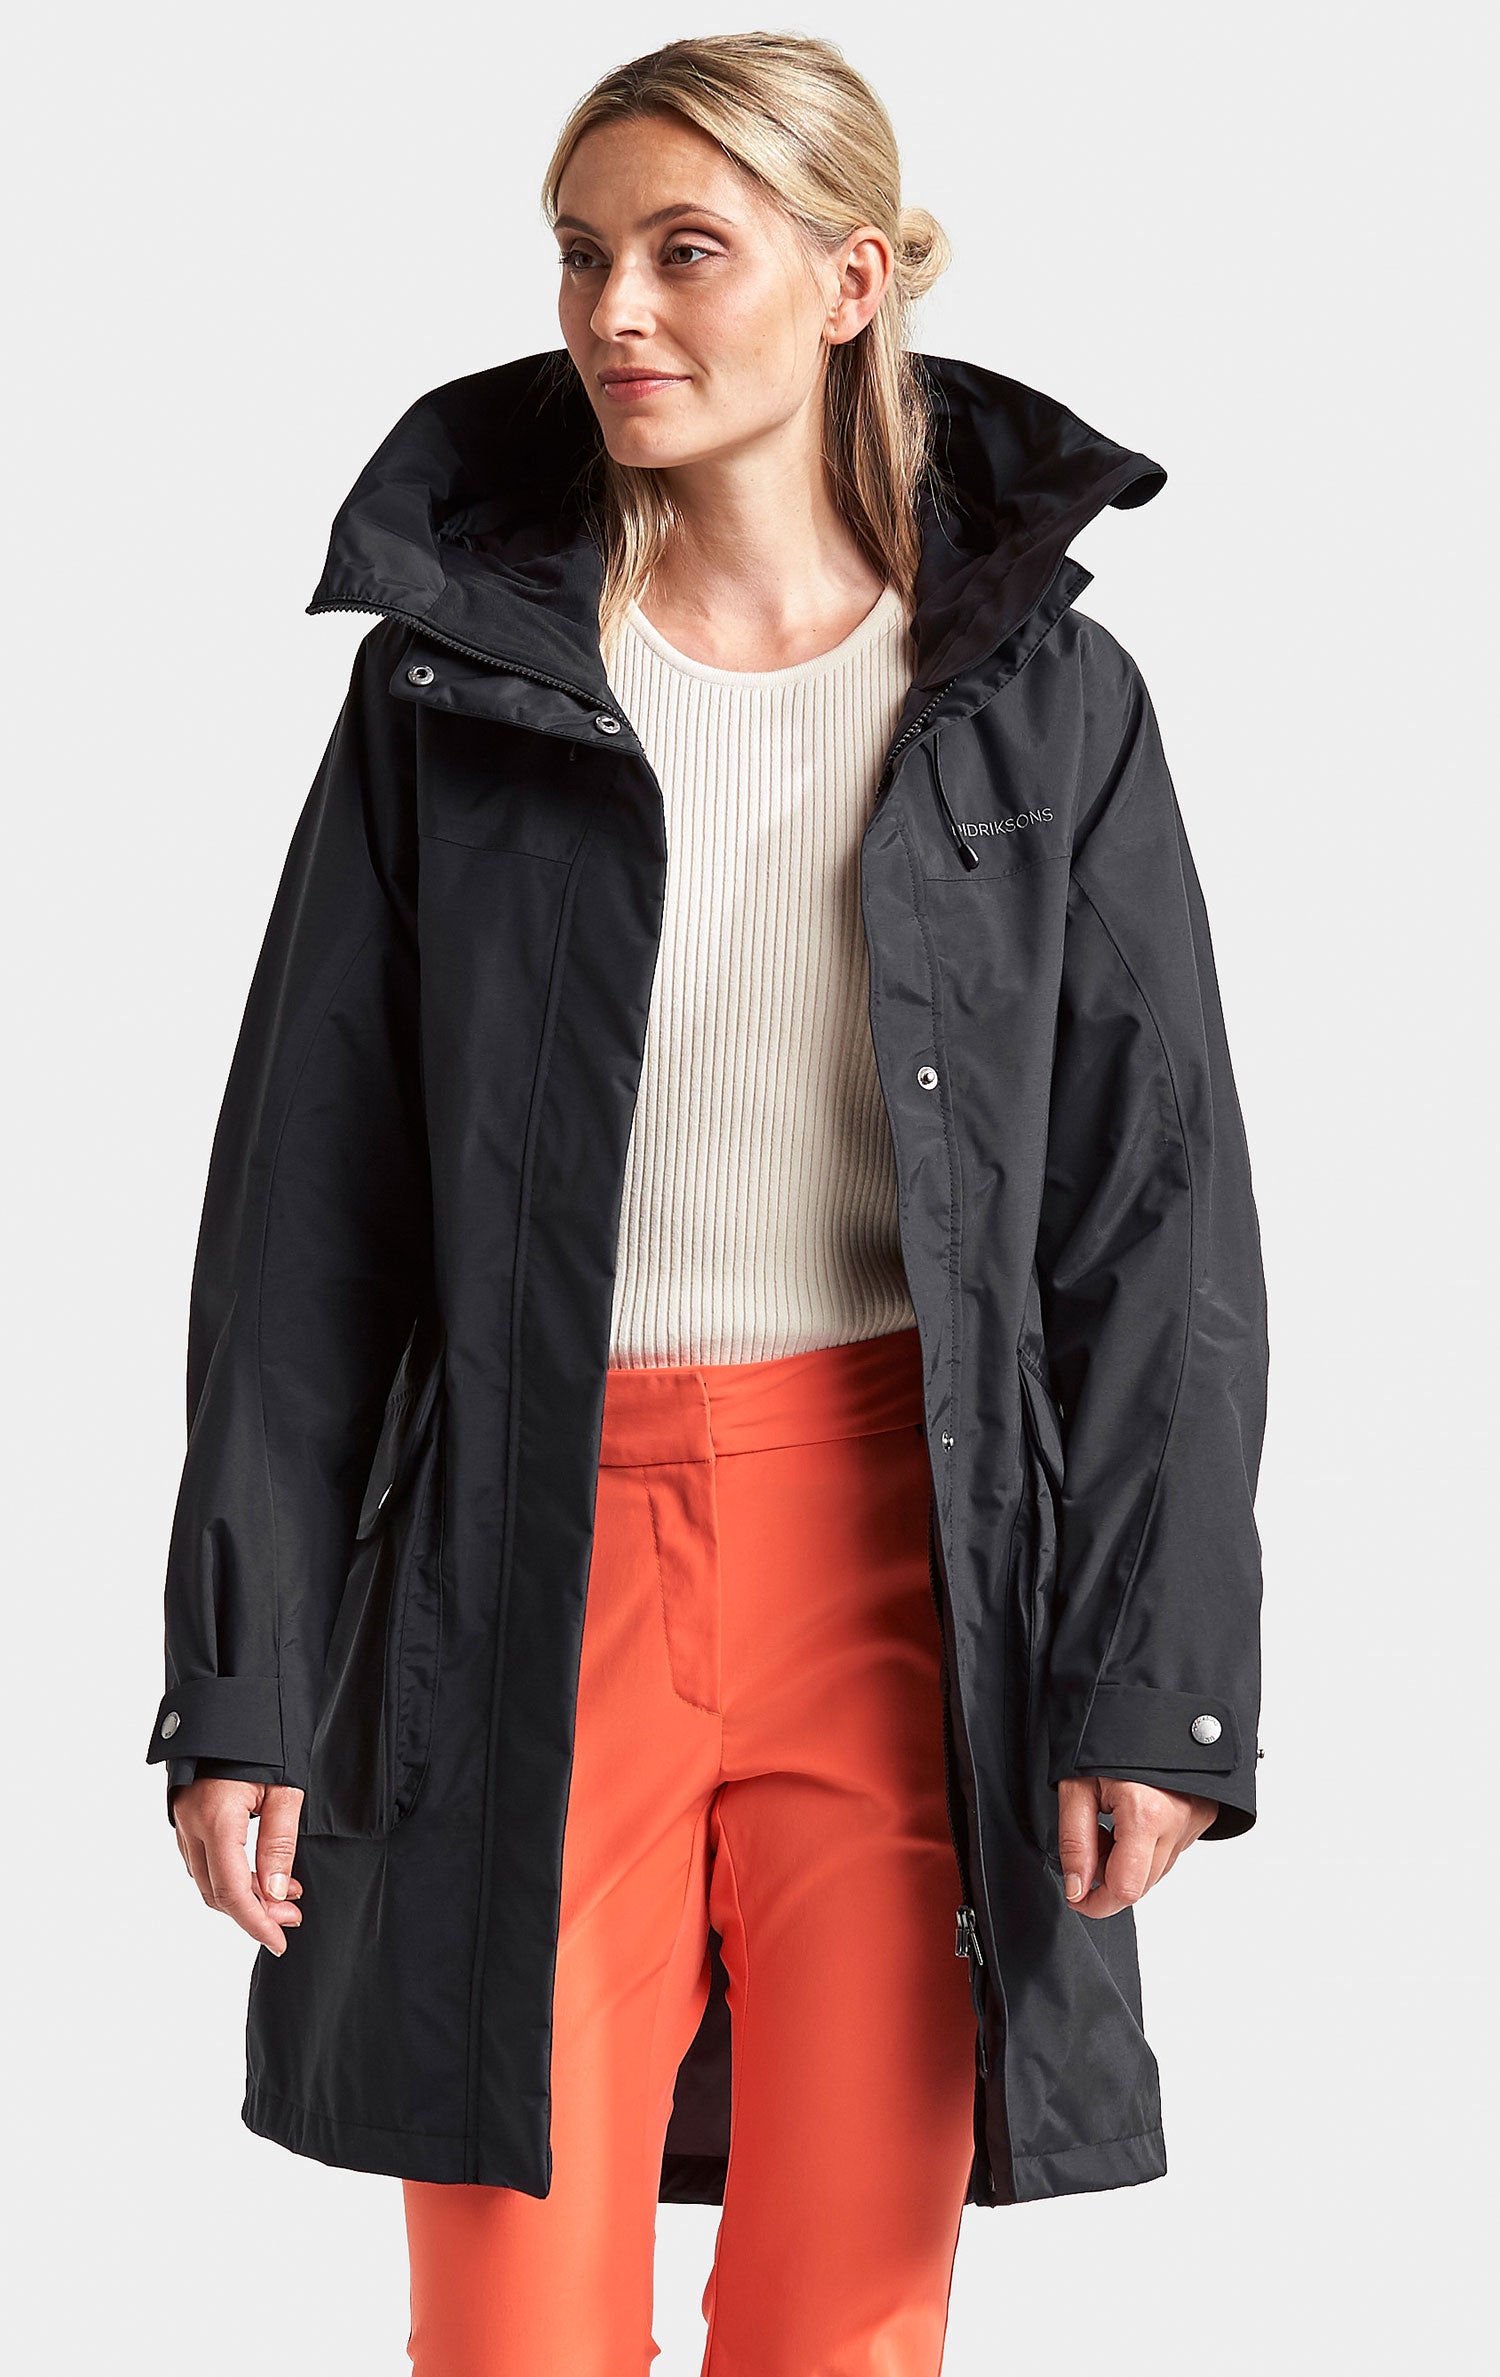 Black parka with over sized collar